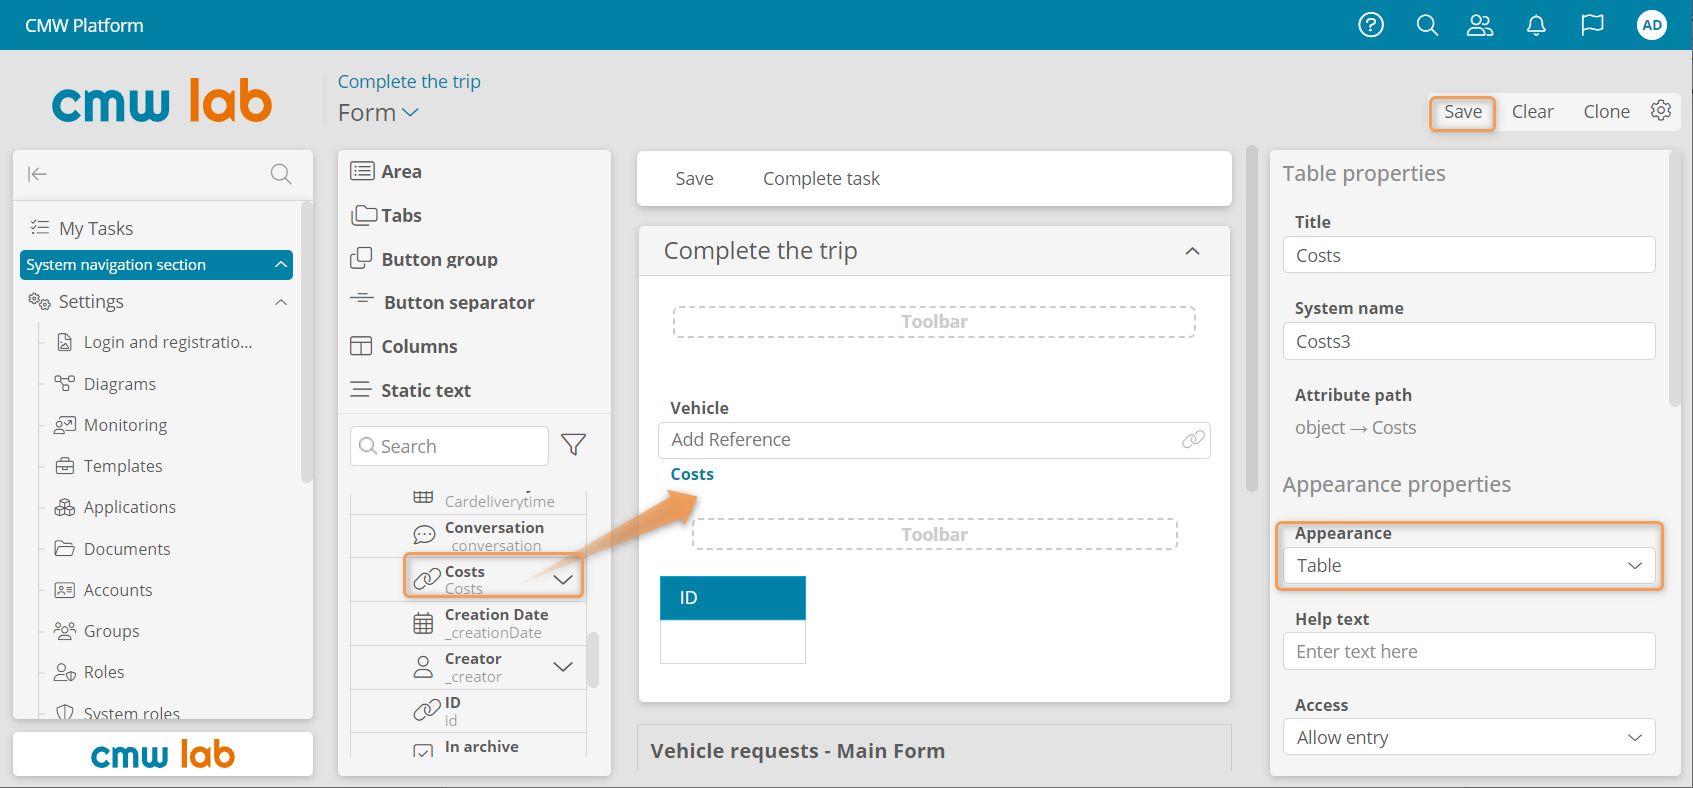 Configuring and saving the Complete the trip task form